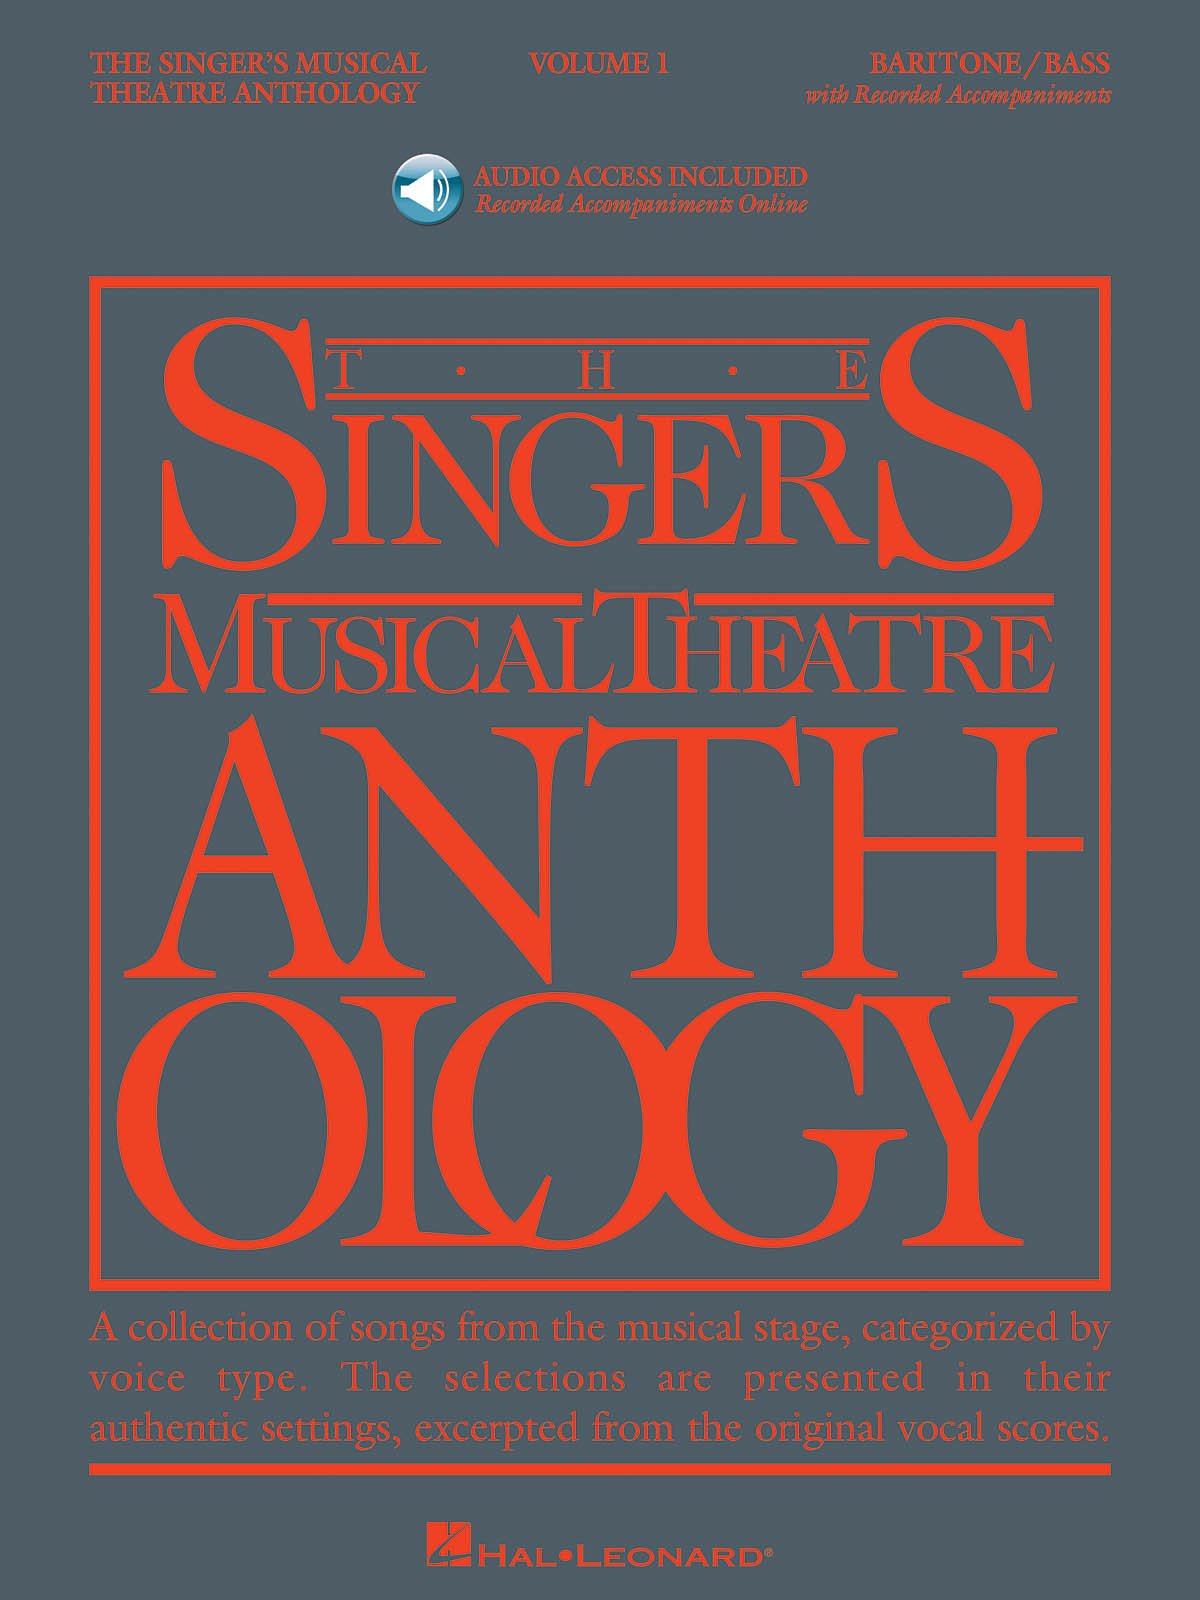 The Singer's Musical Theatre Anthology - Volume 1 (Baritone/Bass) Book/2CDs